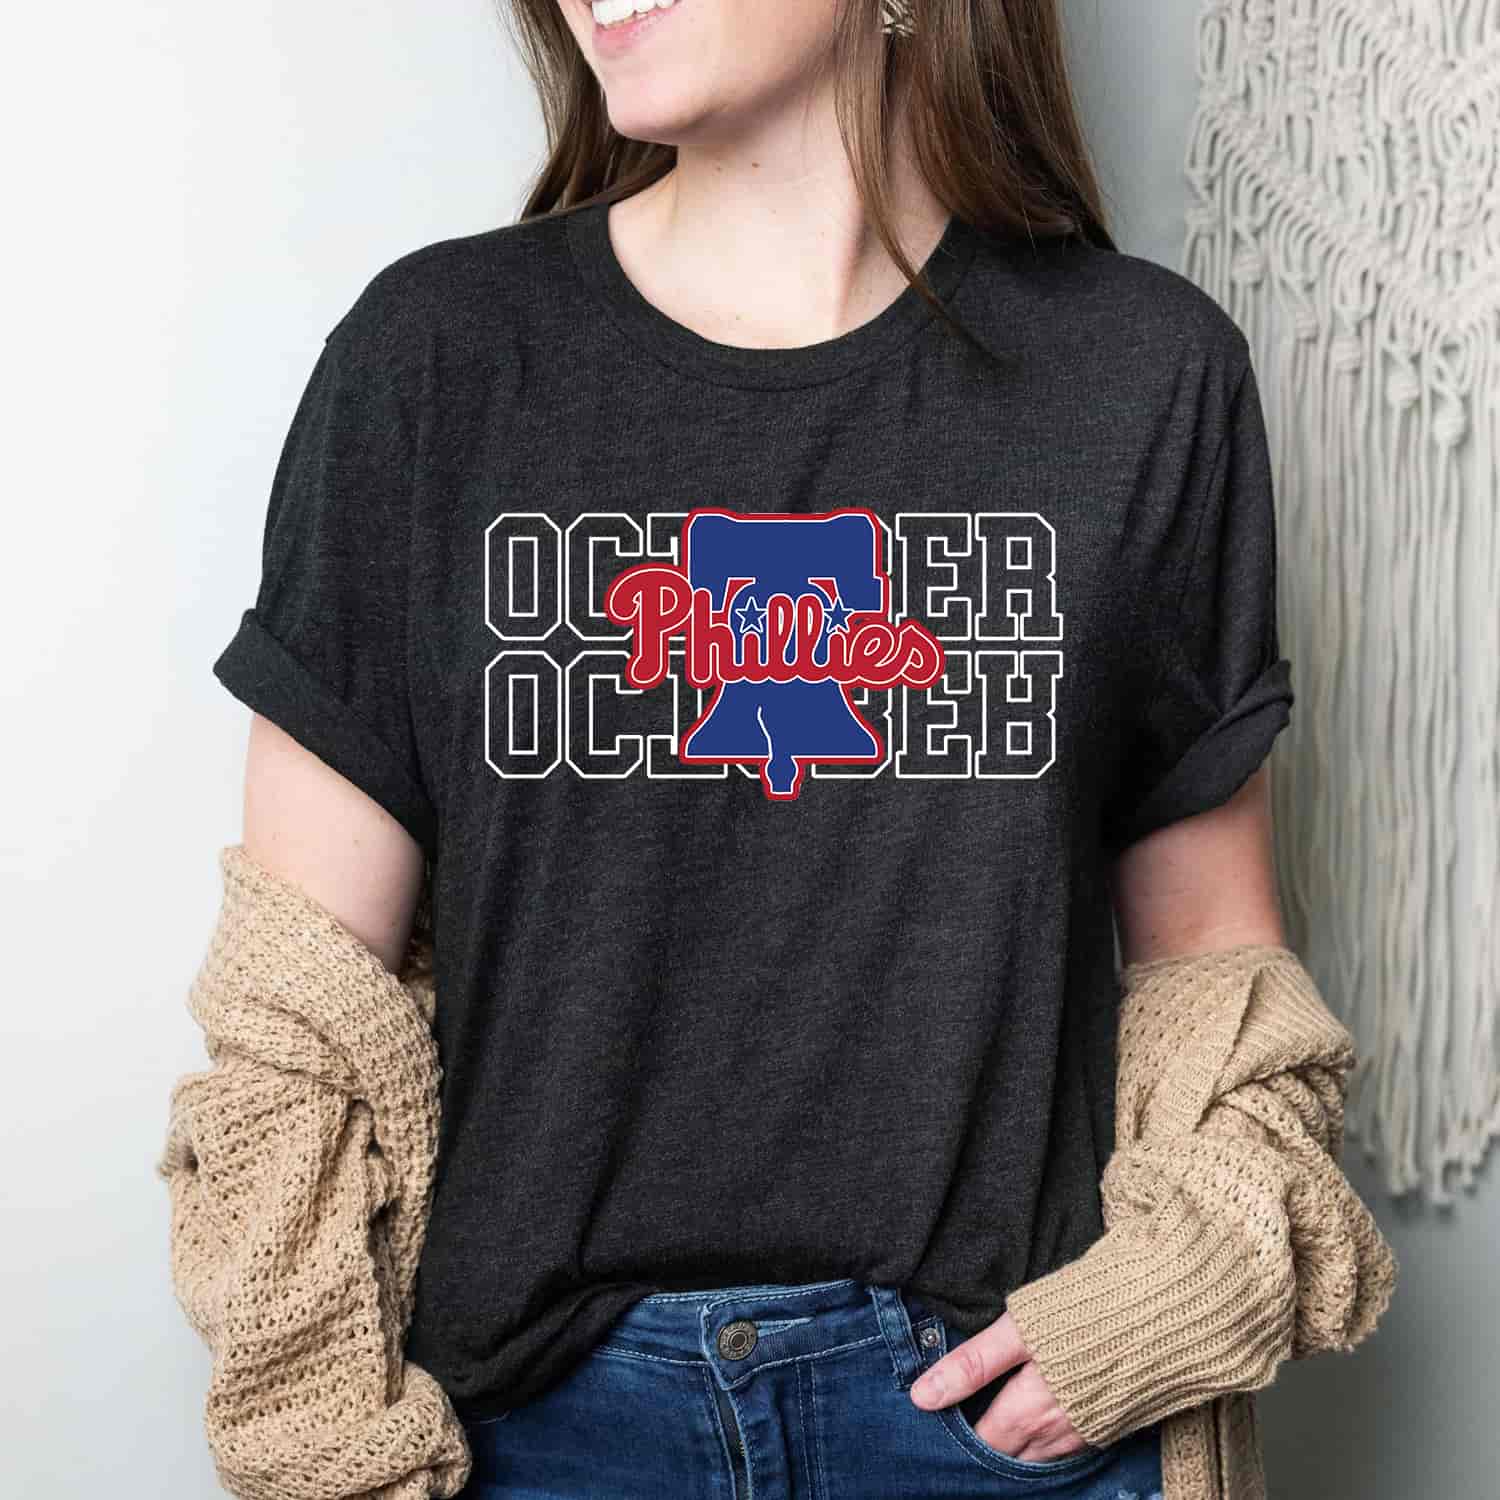 Red October Phillies Shirt, Gifts for Men and Women Phillies Fans - Bring  Your Ideas, Thoughts And Imaginations Into Reality Today